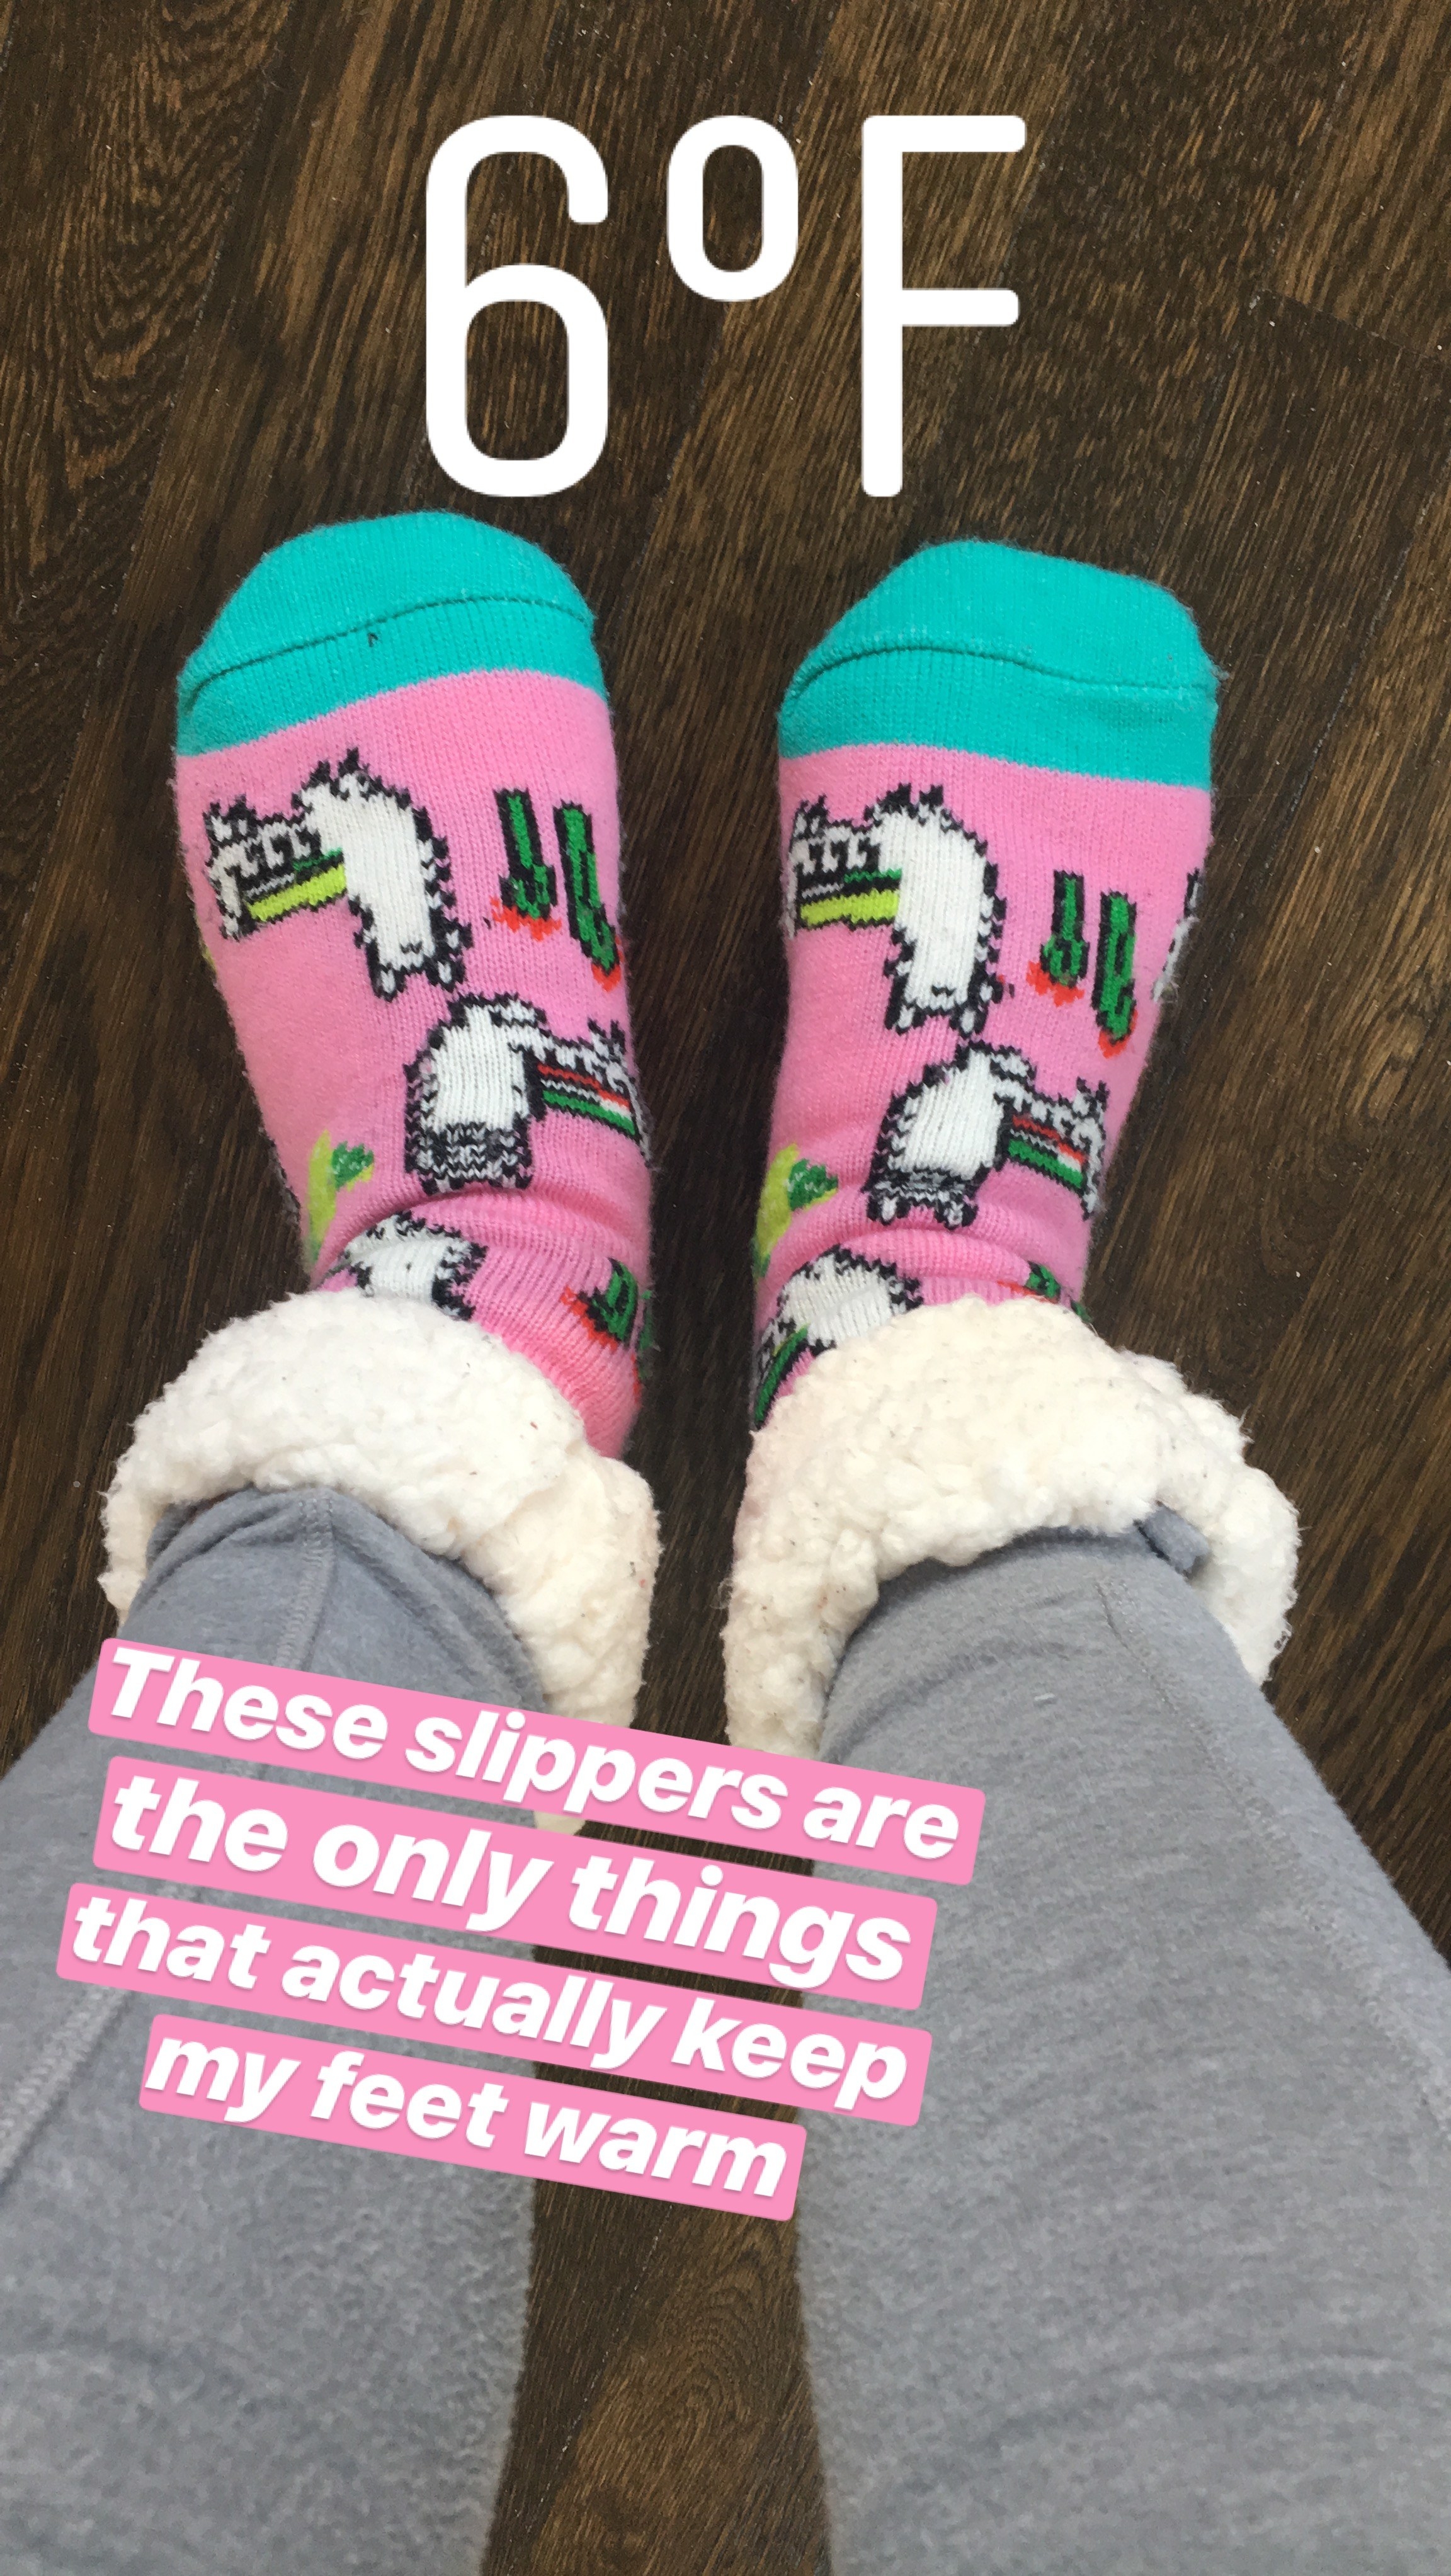 BuzzFeed editor&#x27;s feet in the socks, with text to show it was 6 degrees Fahrenheit and saying &quot;these slippers are the only things that actually keep my feet warm&quot;